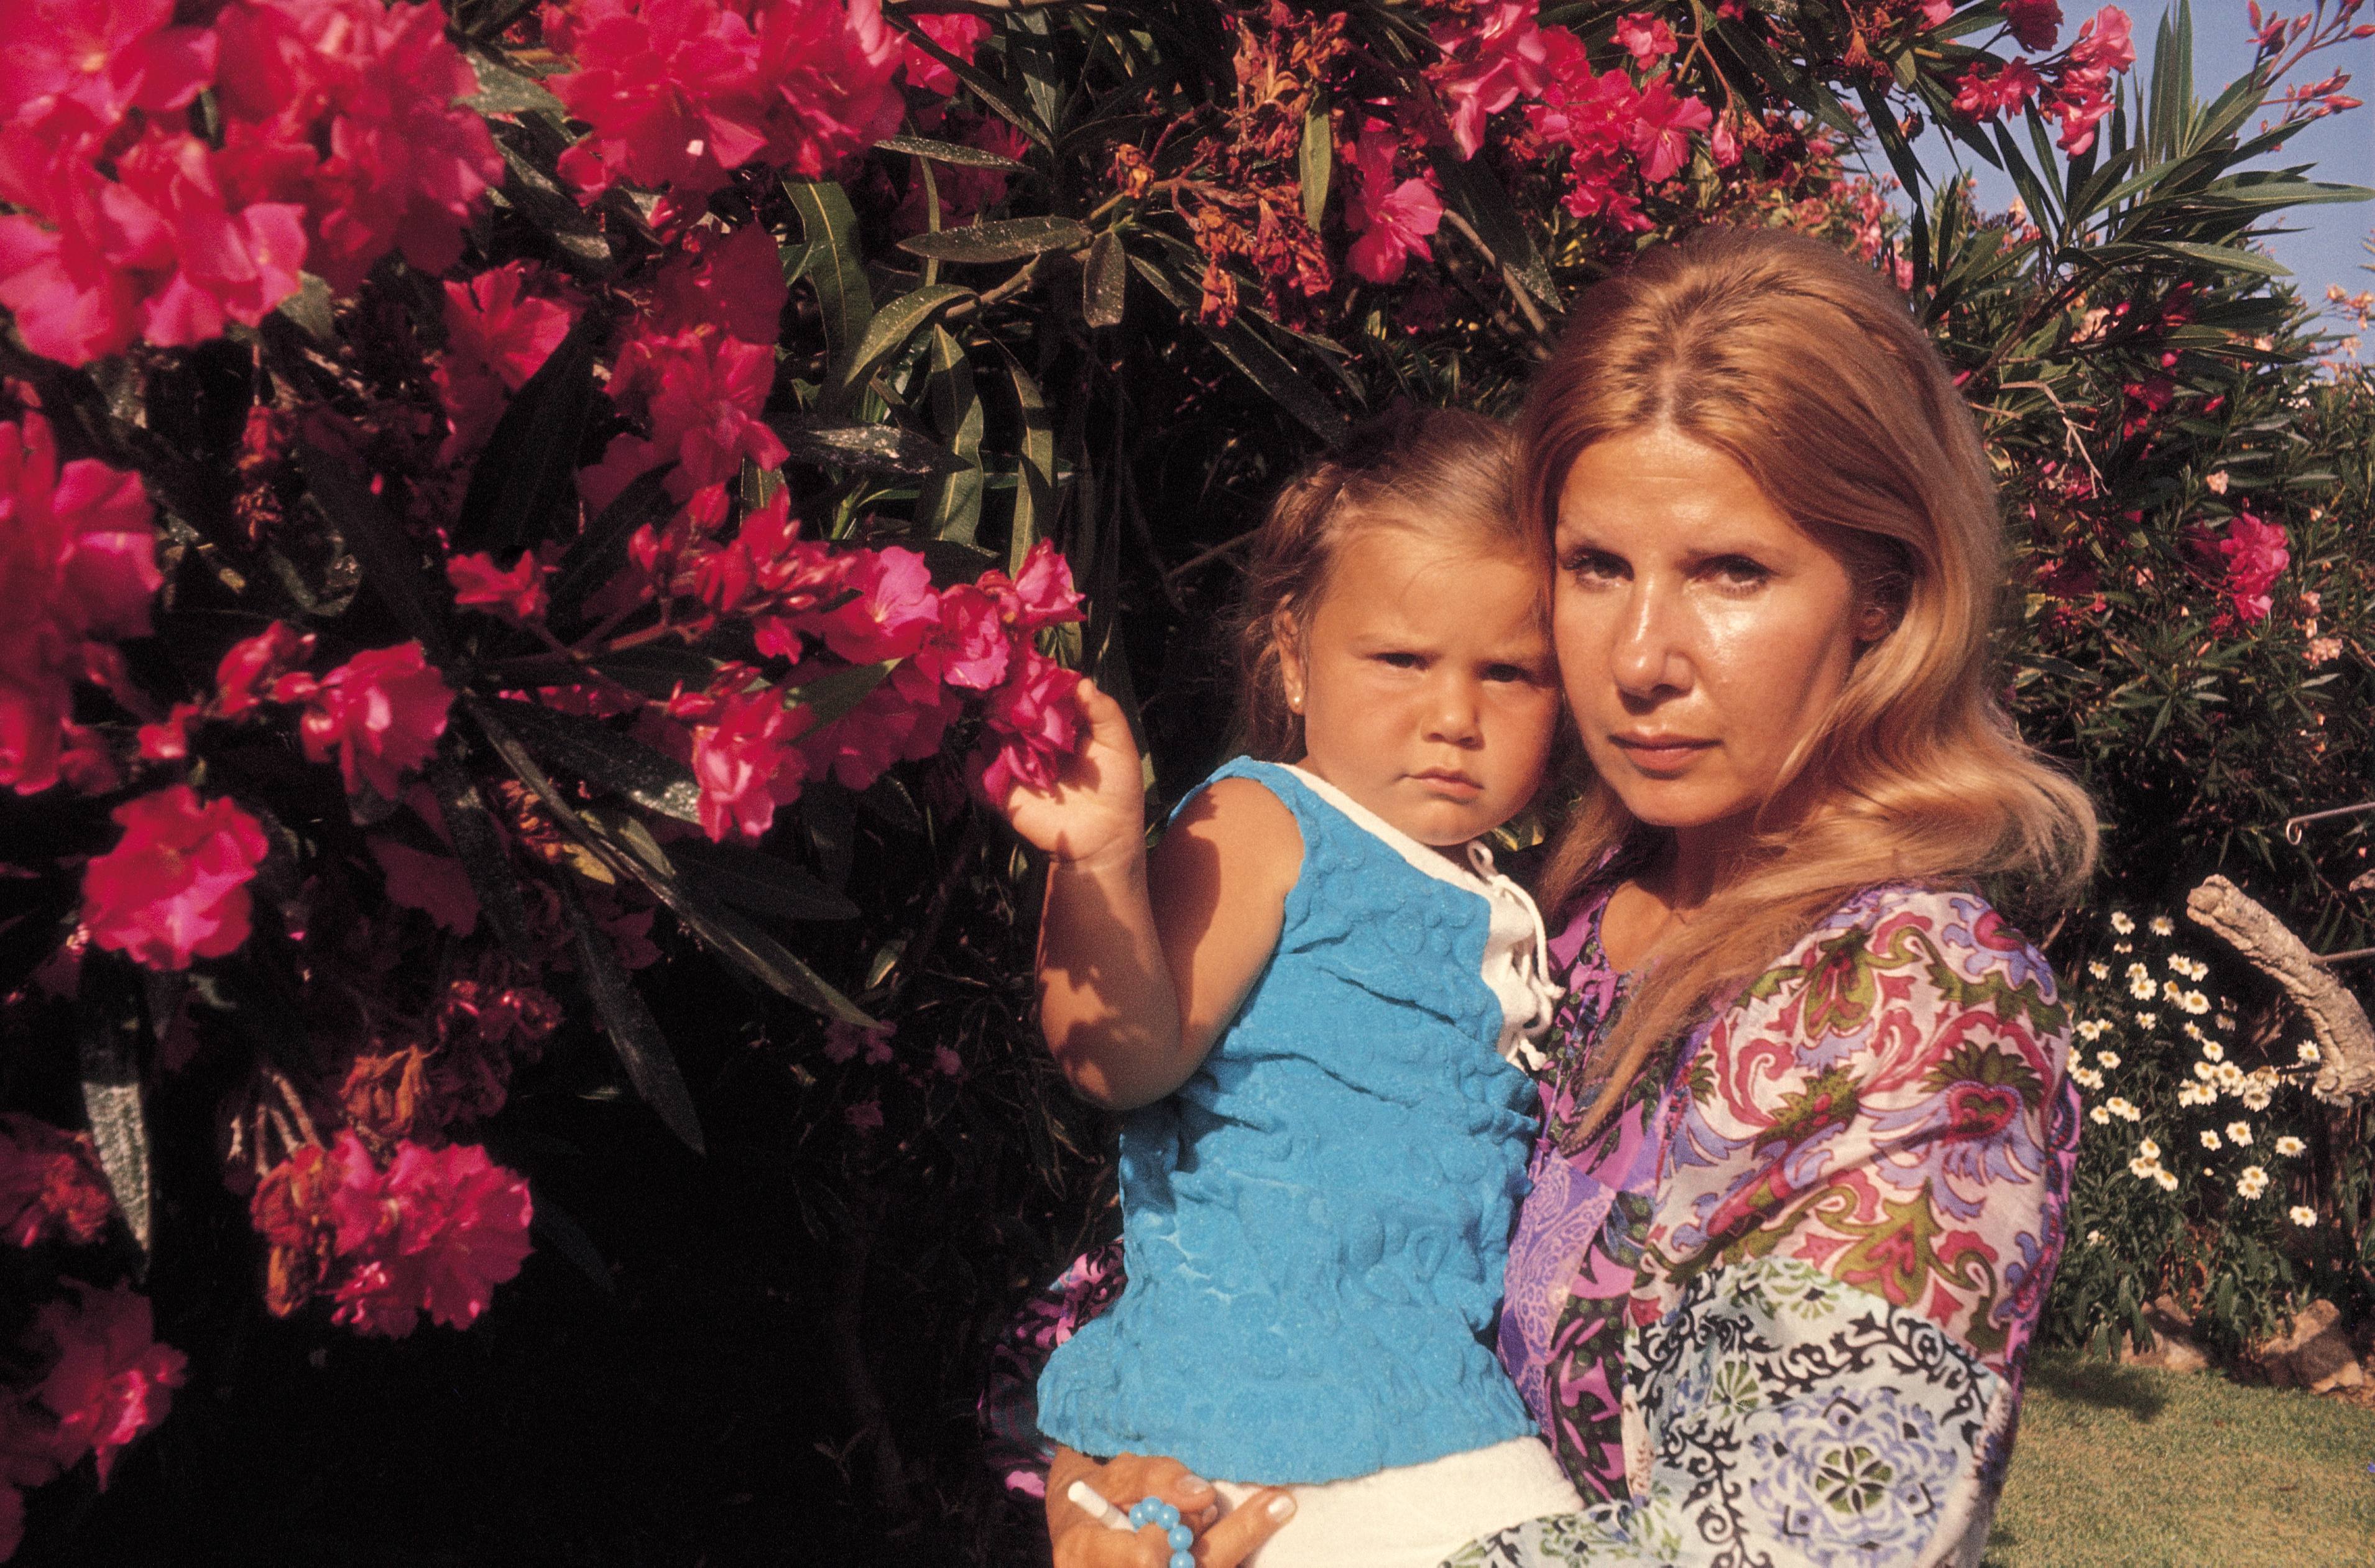 The Duchess of Alba, Maria del Rosario Cayetana Fitz-James-Stuart with her daughter in 1971. | Source: Getty Images